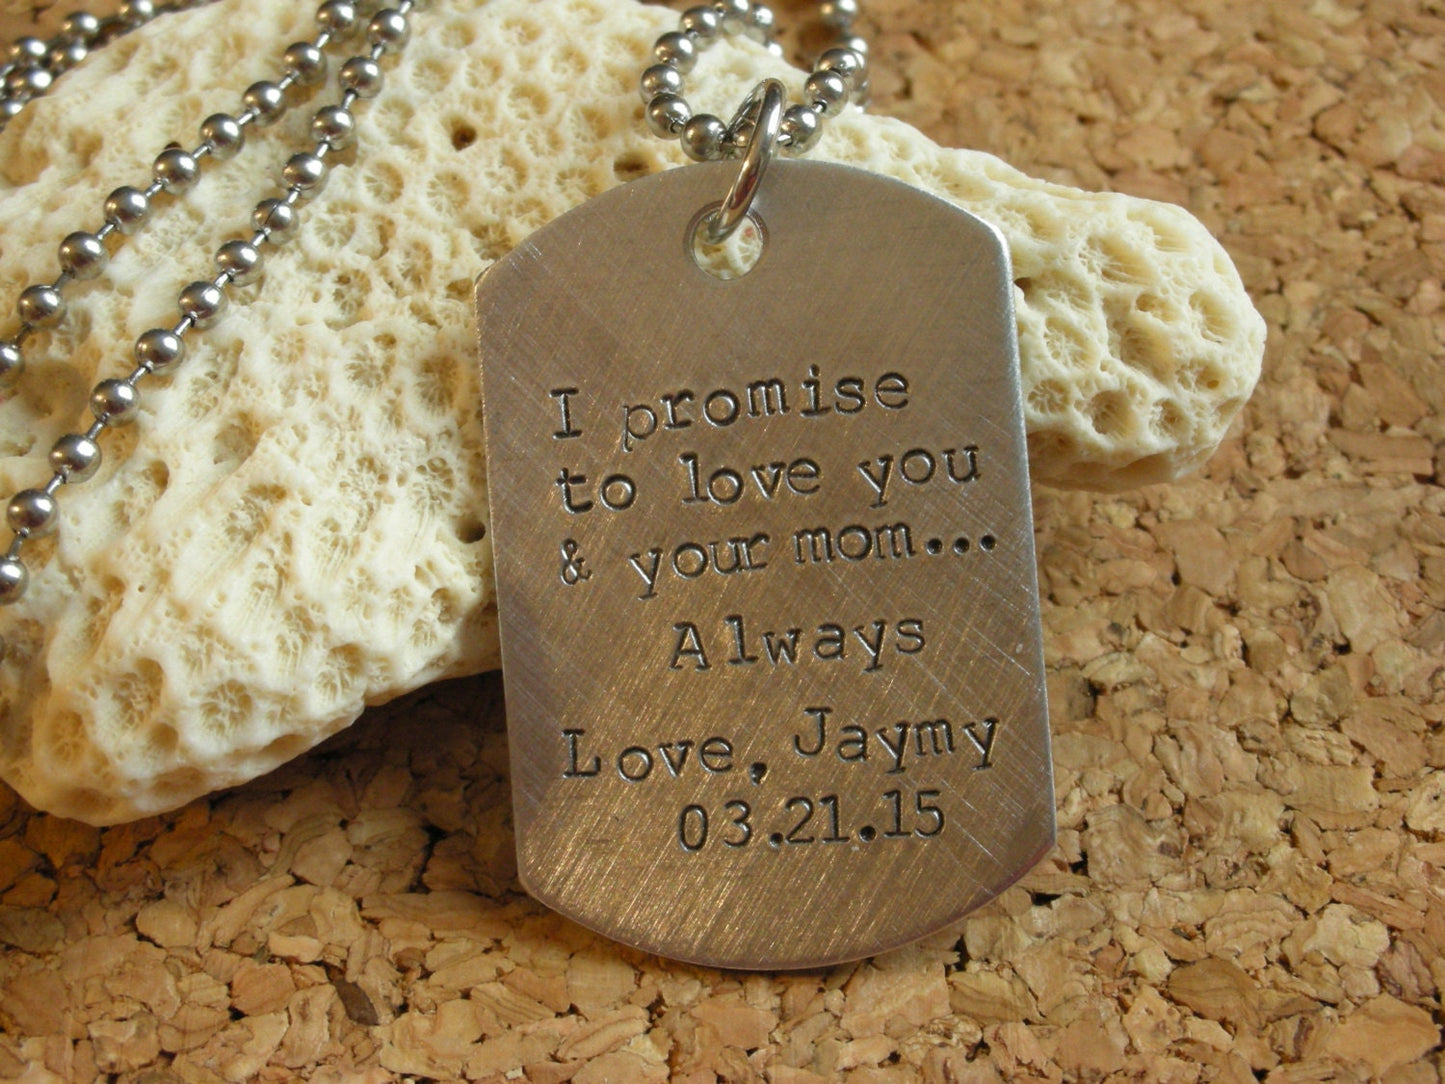 Wedding Gift for Stepson-Stepson Gift from Bride-Stepson Gift from Groom-Blended Family Gift-Dogtags for Wedding-Personalized Dog Tag